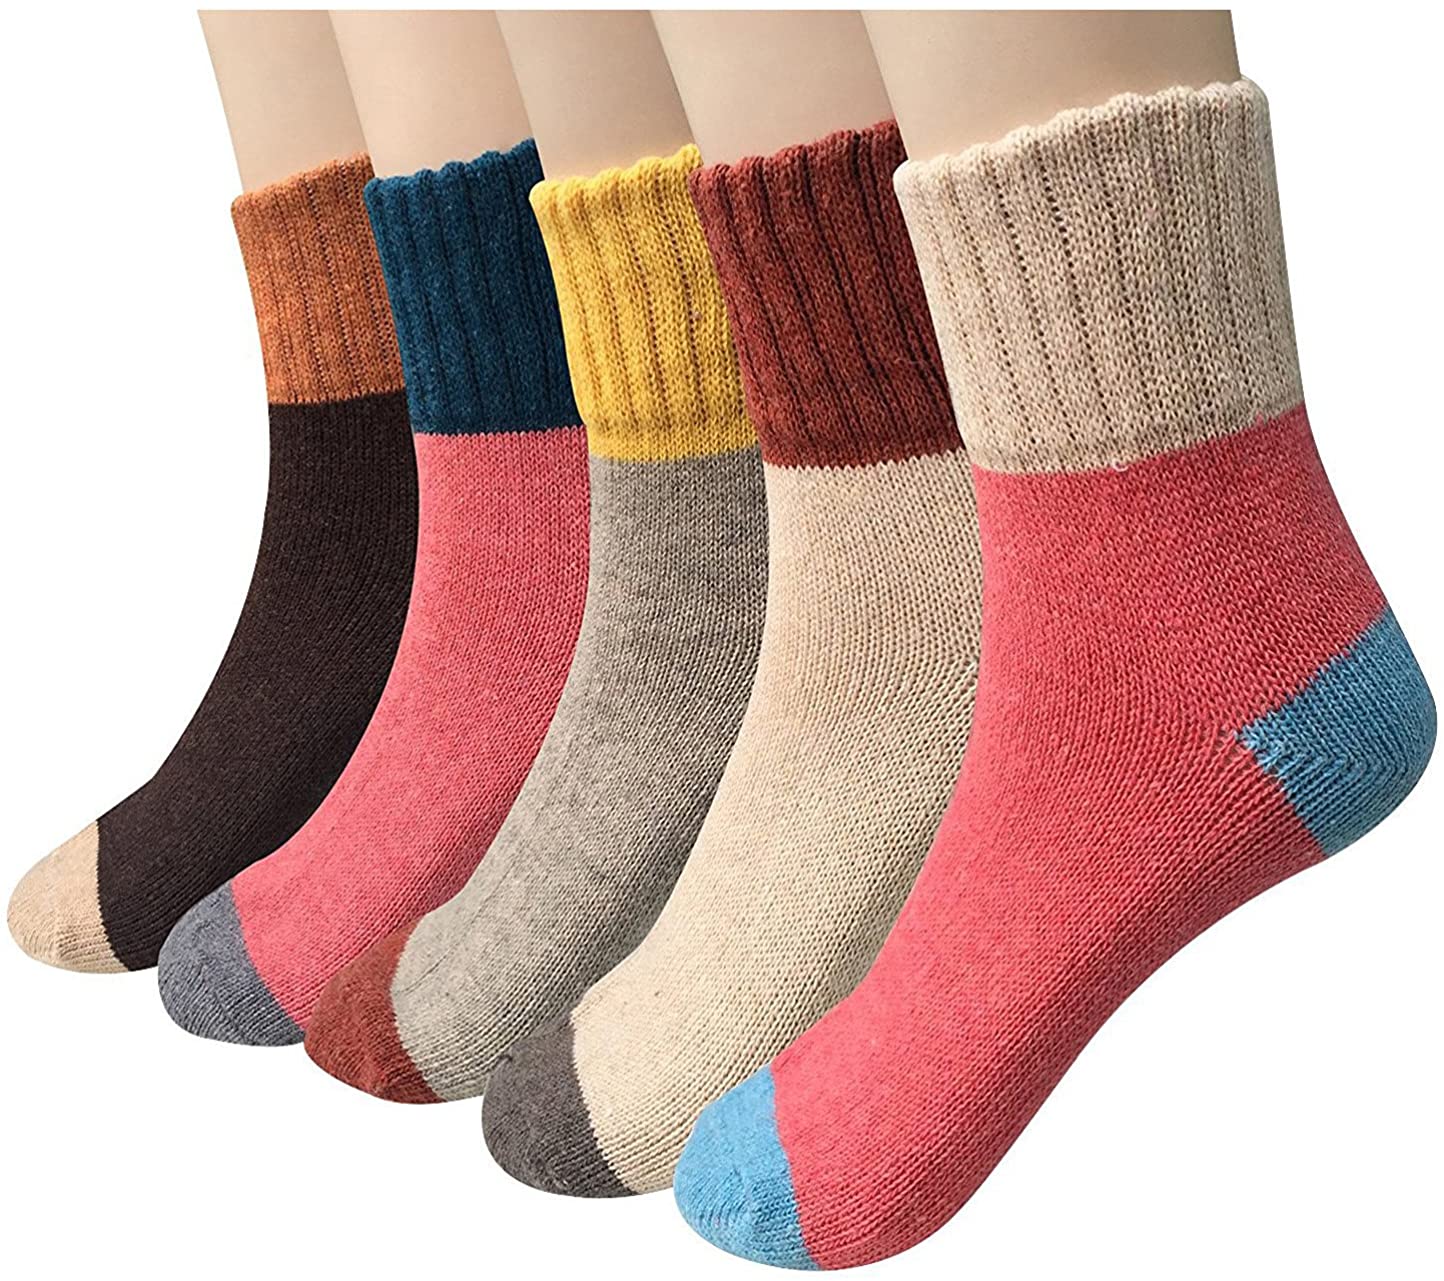 Details about   5 Pairs Womens Winter Socks Vintage Soft Cozy Warm Thick Knit Wool Crew Socks 